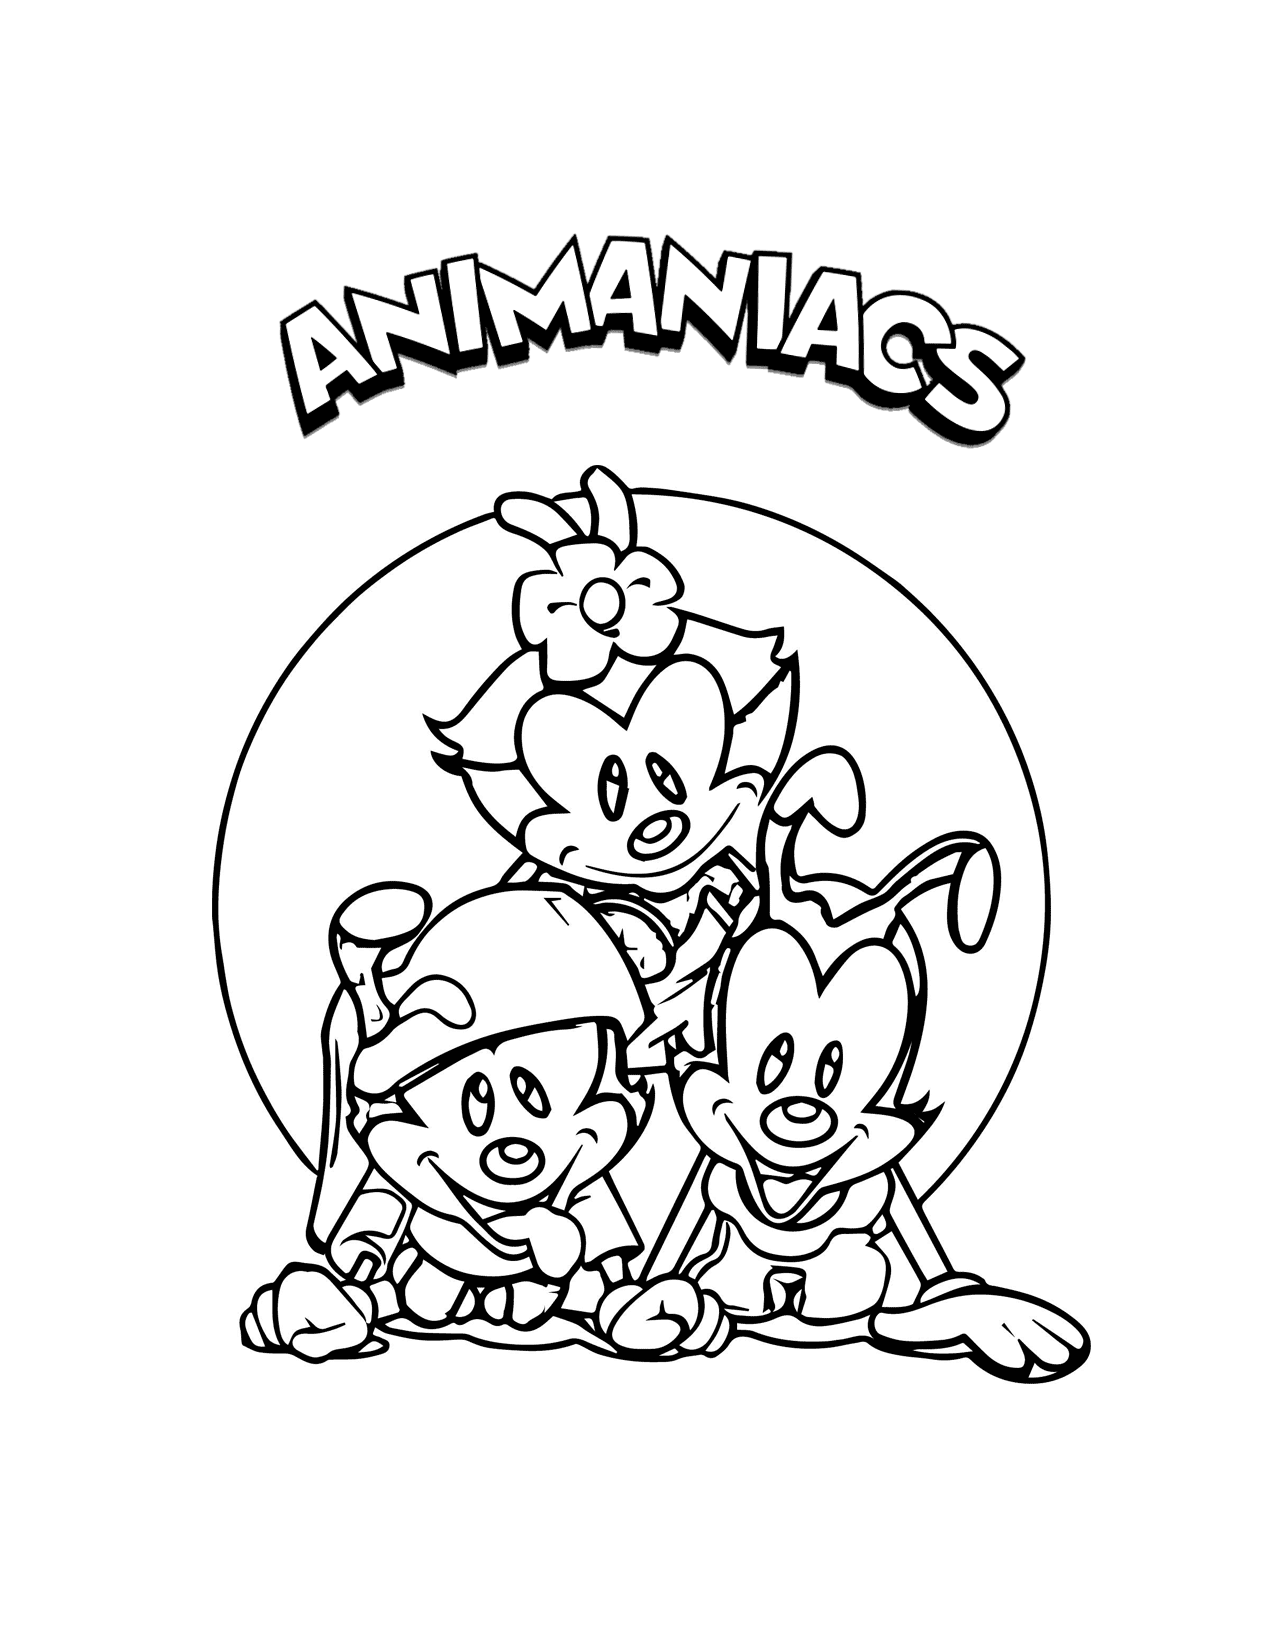 Animaniacs Coloring Page